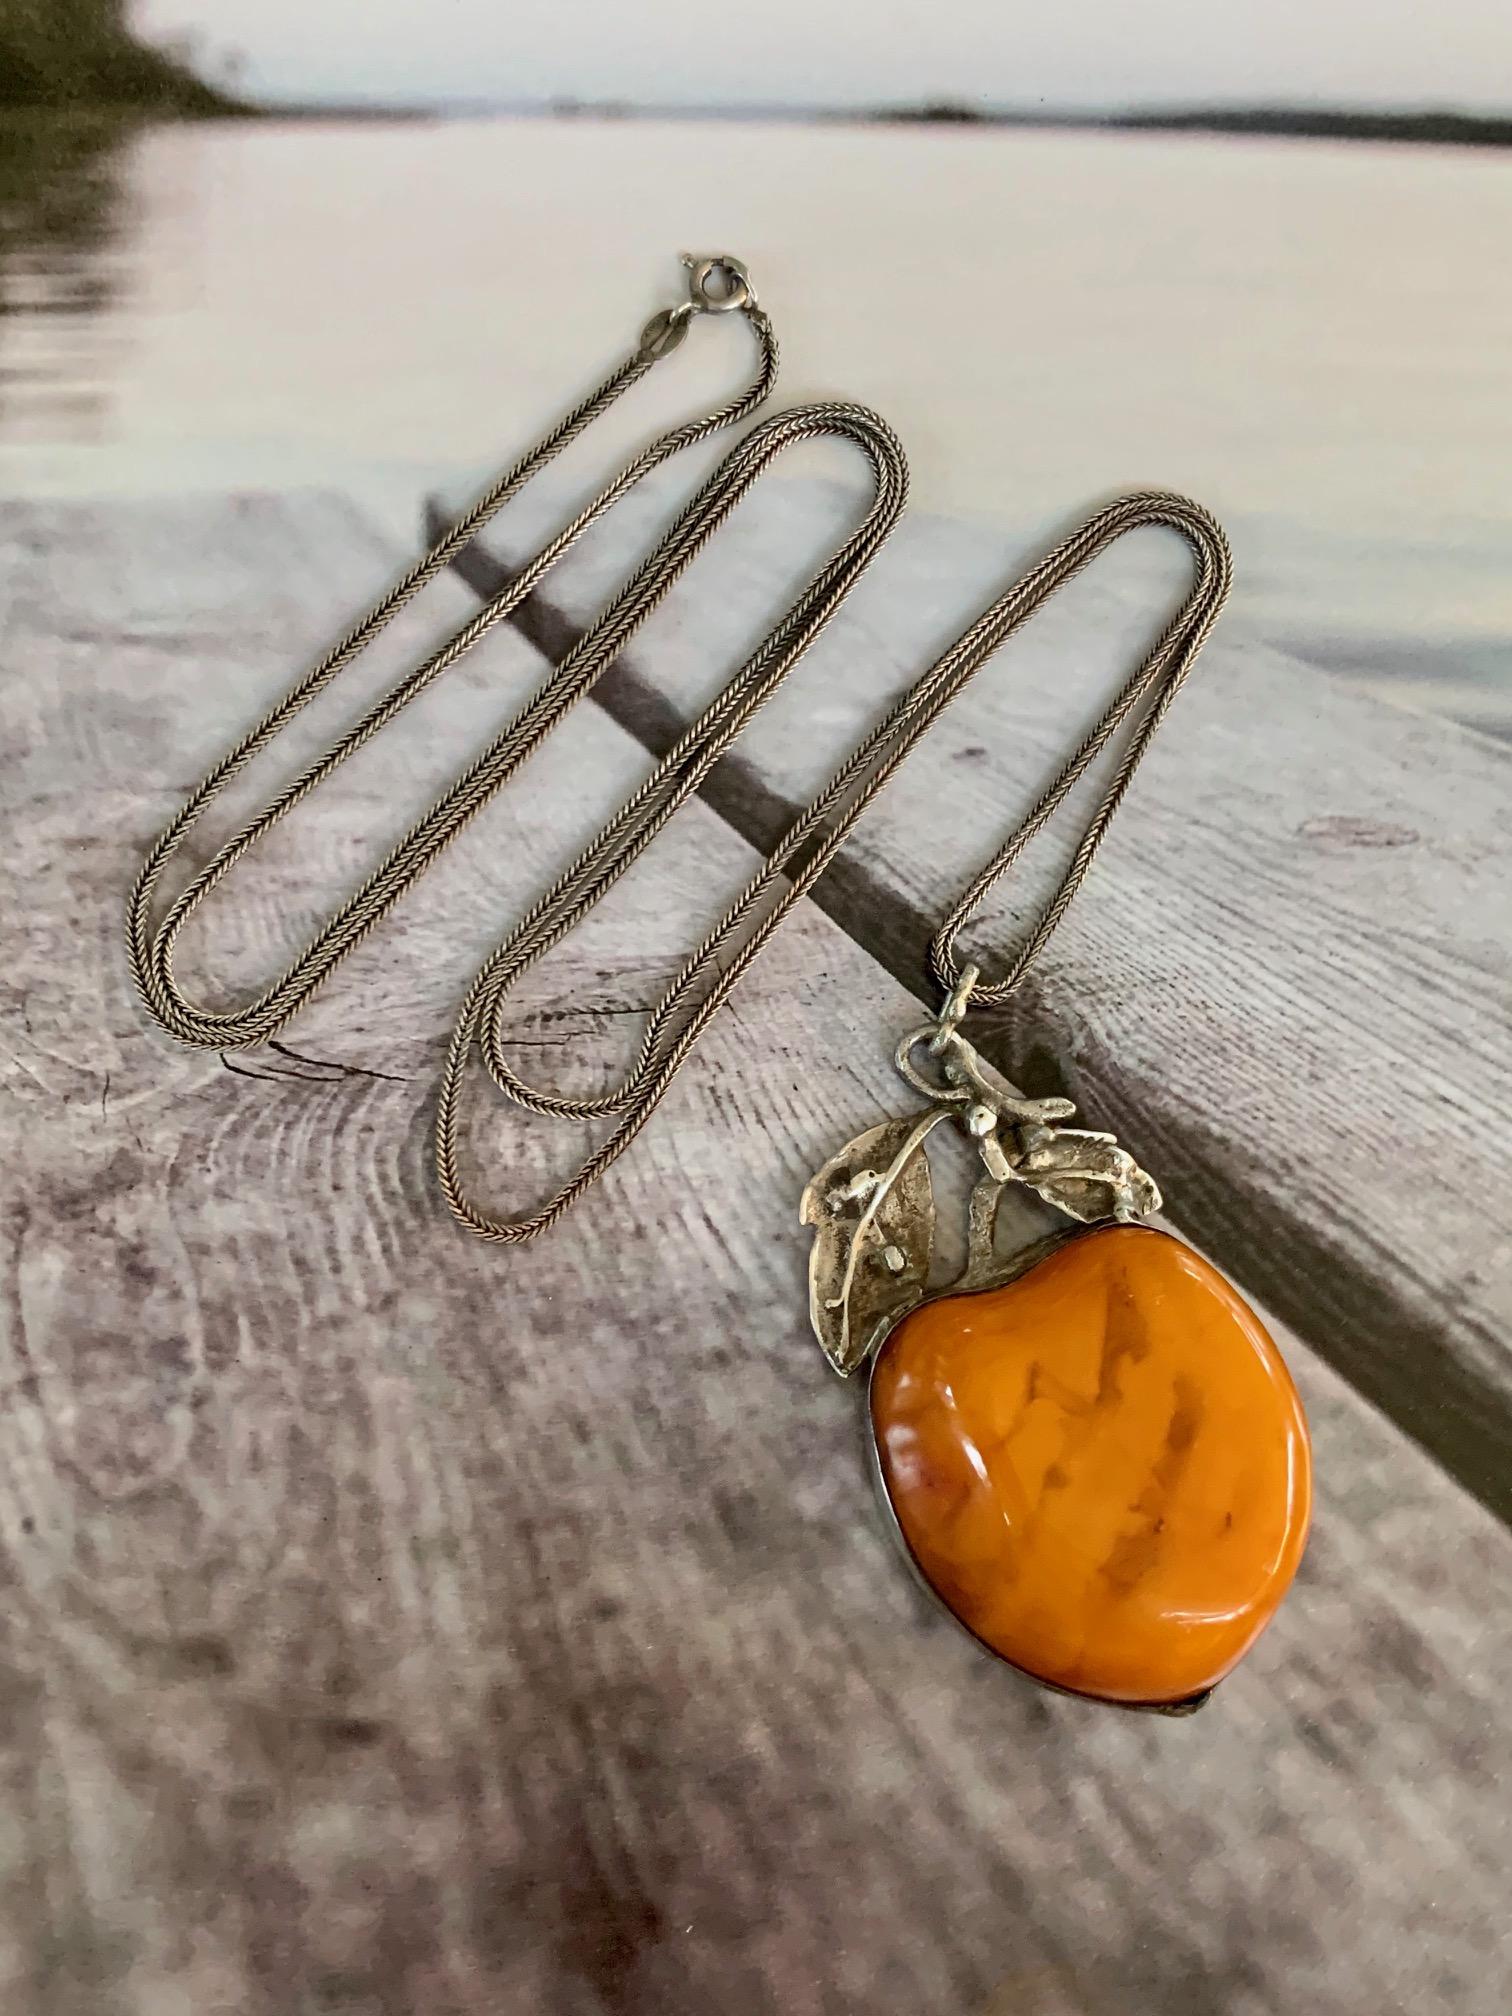 This unique Amber Fruit-shaped pendant is adorned with sterling Silver and hangs from a 32